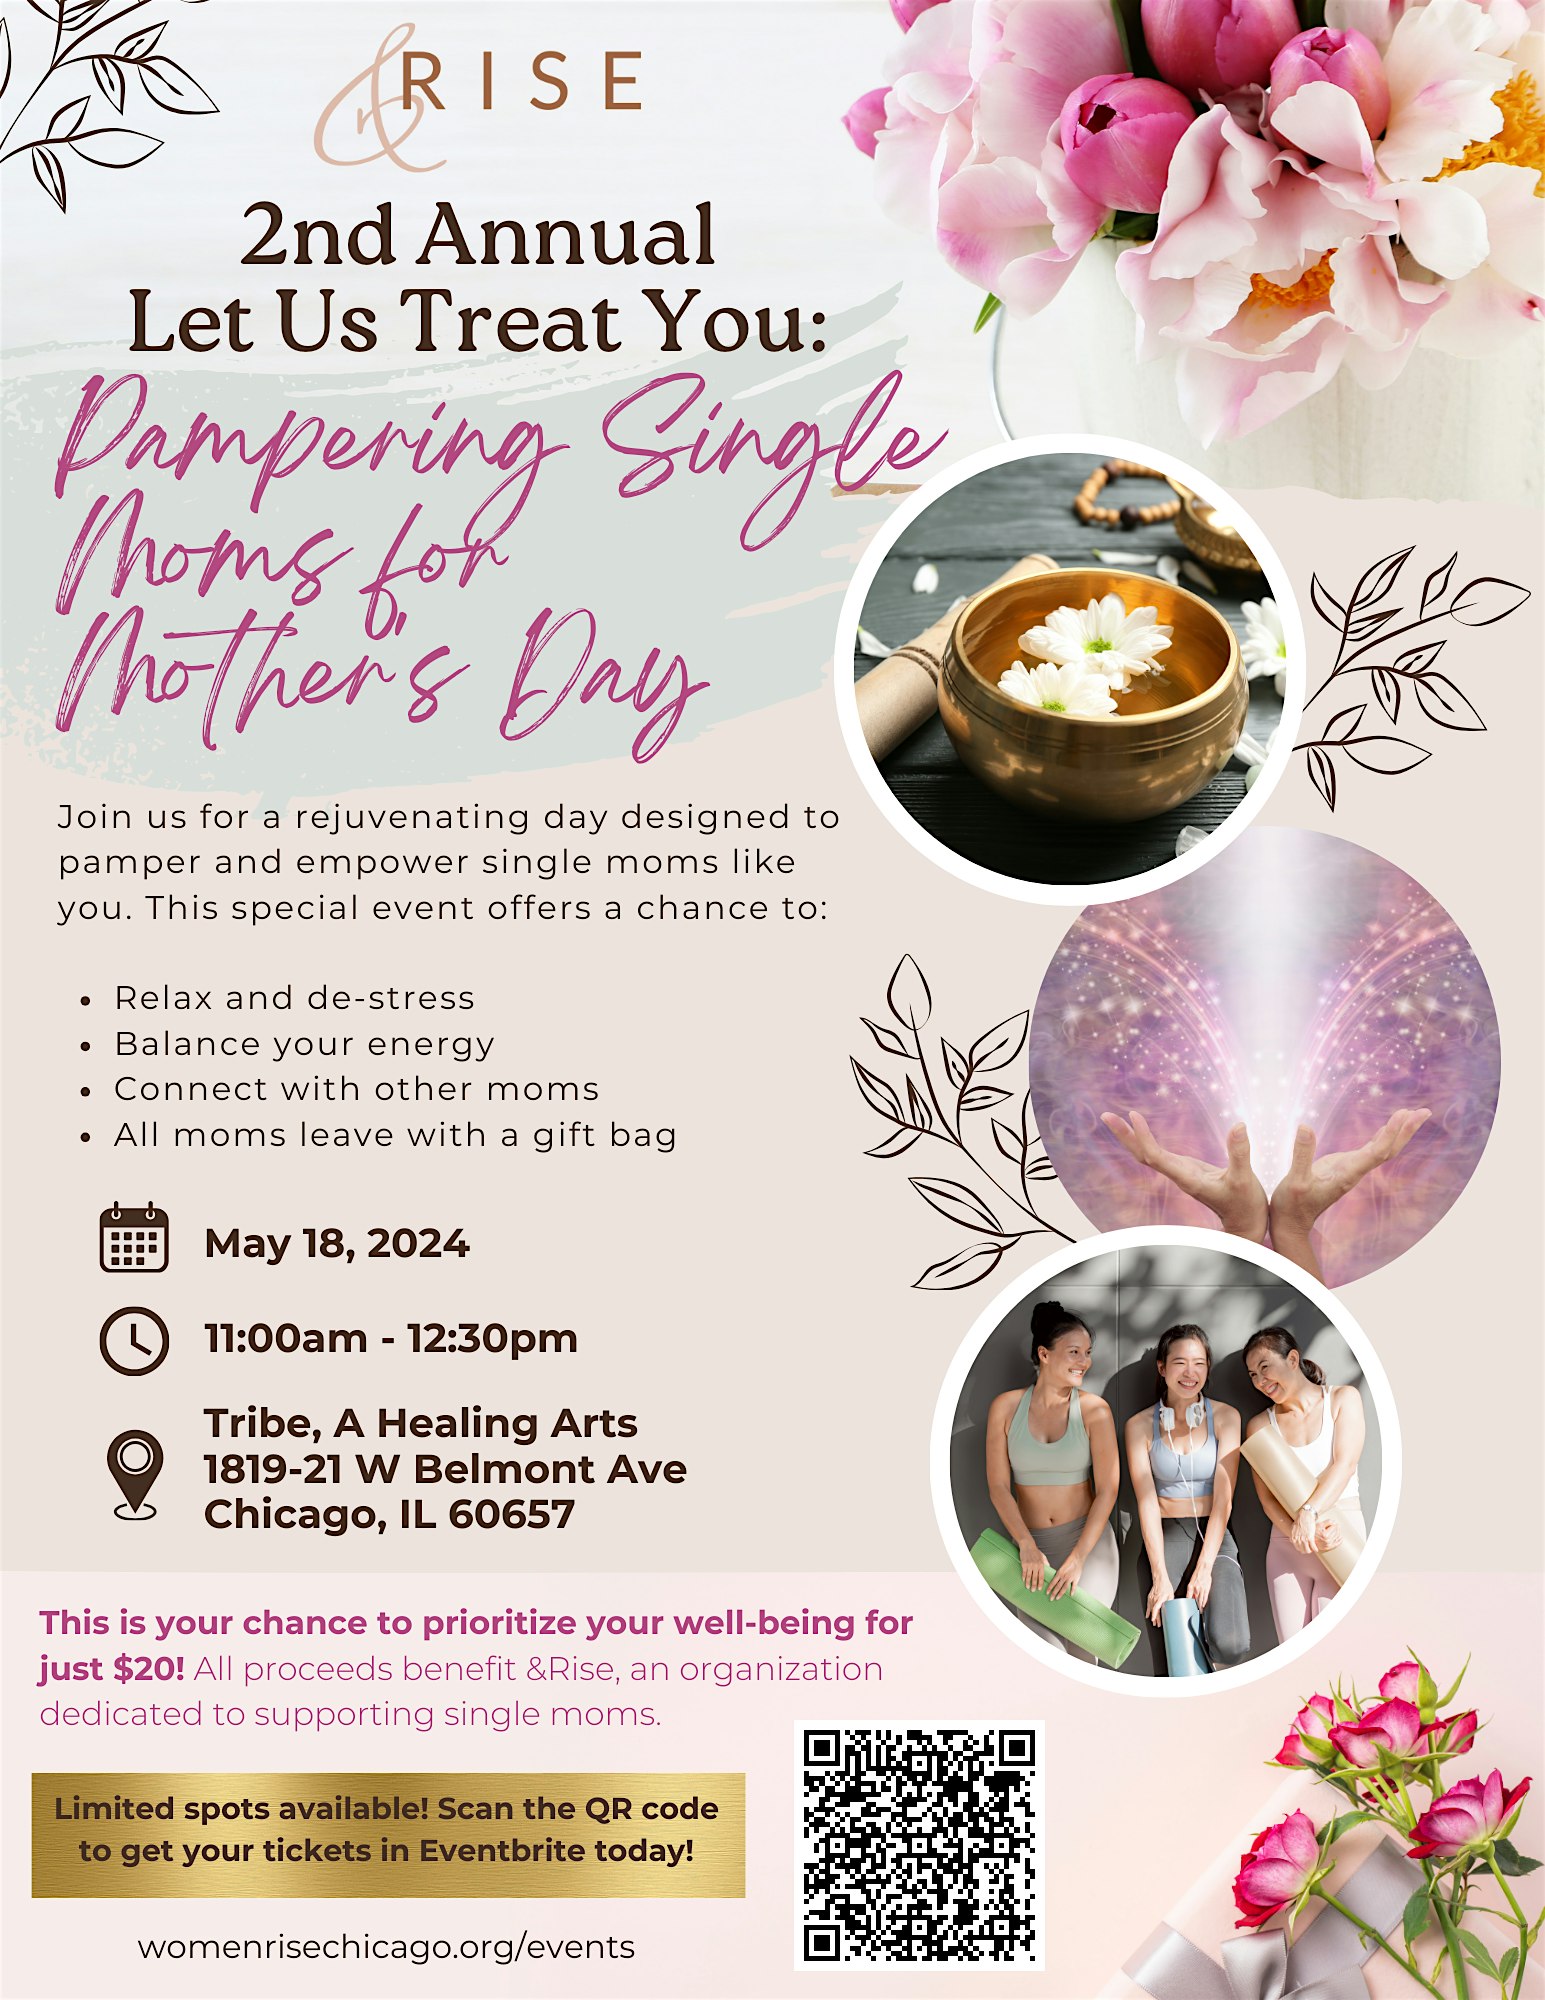 2nd Annual Let Us Treat You: Pampering Single Moms for Mother's Day